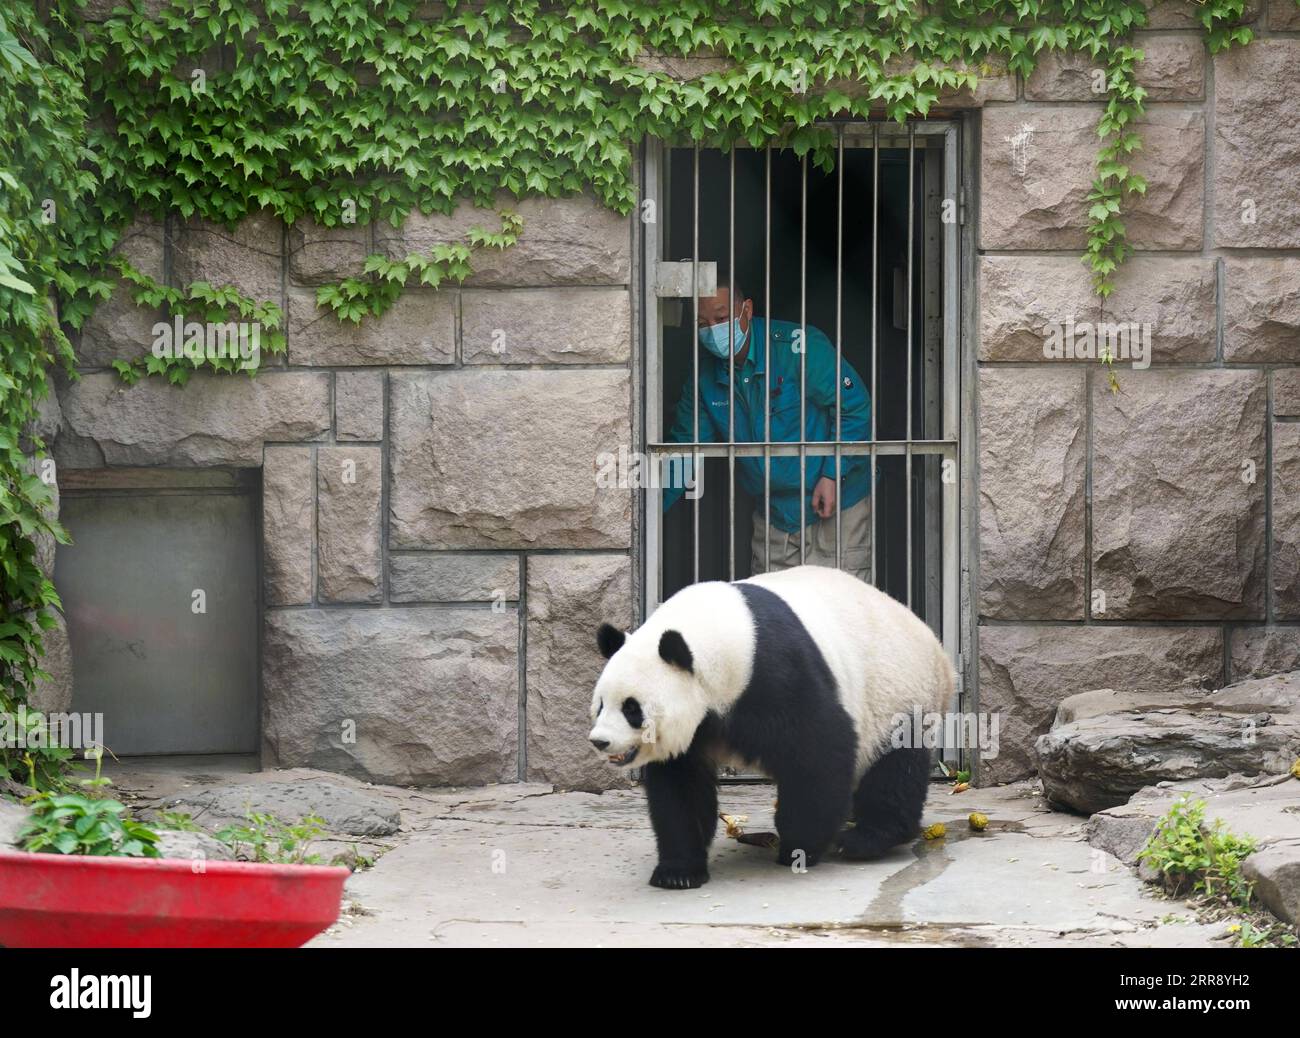 210521 -- BEIJING, May 21, 2021 -- Ma Tao releases giant panda Meng Meng to the open-air ground after preparing food at the giant panda pavilion of Beijing Zoo in Beijing, capital of China, April 21, 2021. Ma Tao, 51 years old, breeder of the giant panda pavilion of Beijing Zoo, has been a feeder of giant pandas for 32 years. Every day, before working, Ma observes the condition of giant pandas and adjusts food recipe for them. Over the past years, Ma has fed about 20 giant pandas, with whom he also developed deep emotions. Nowadays he can quickly judge the health condition of the animal with m Stock Photo